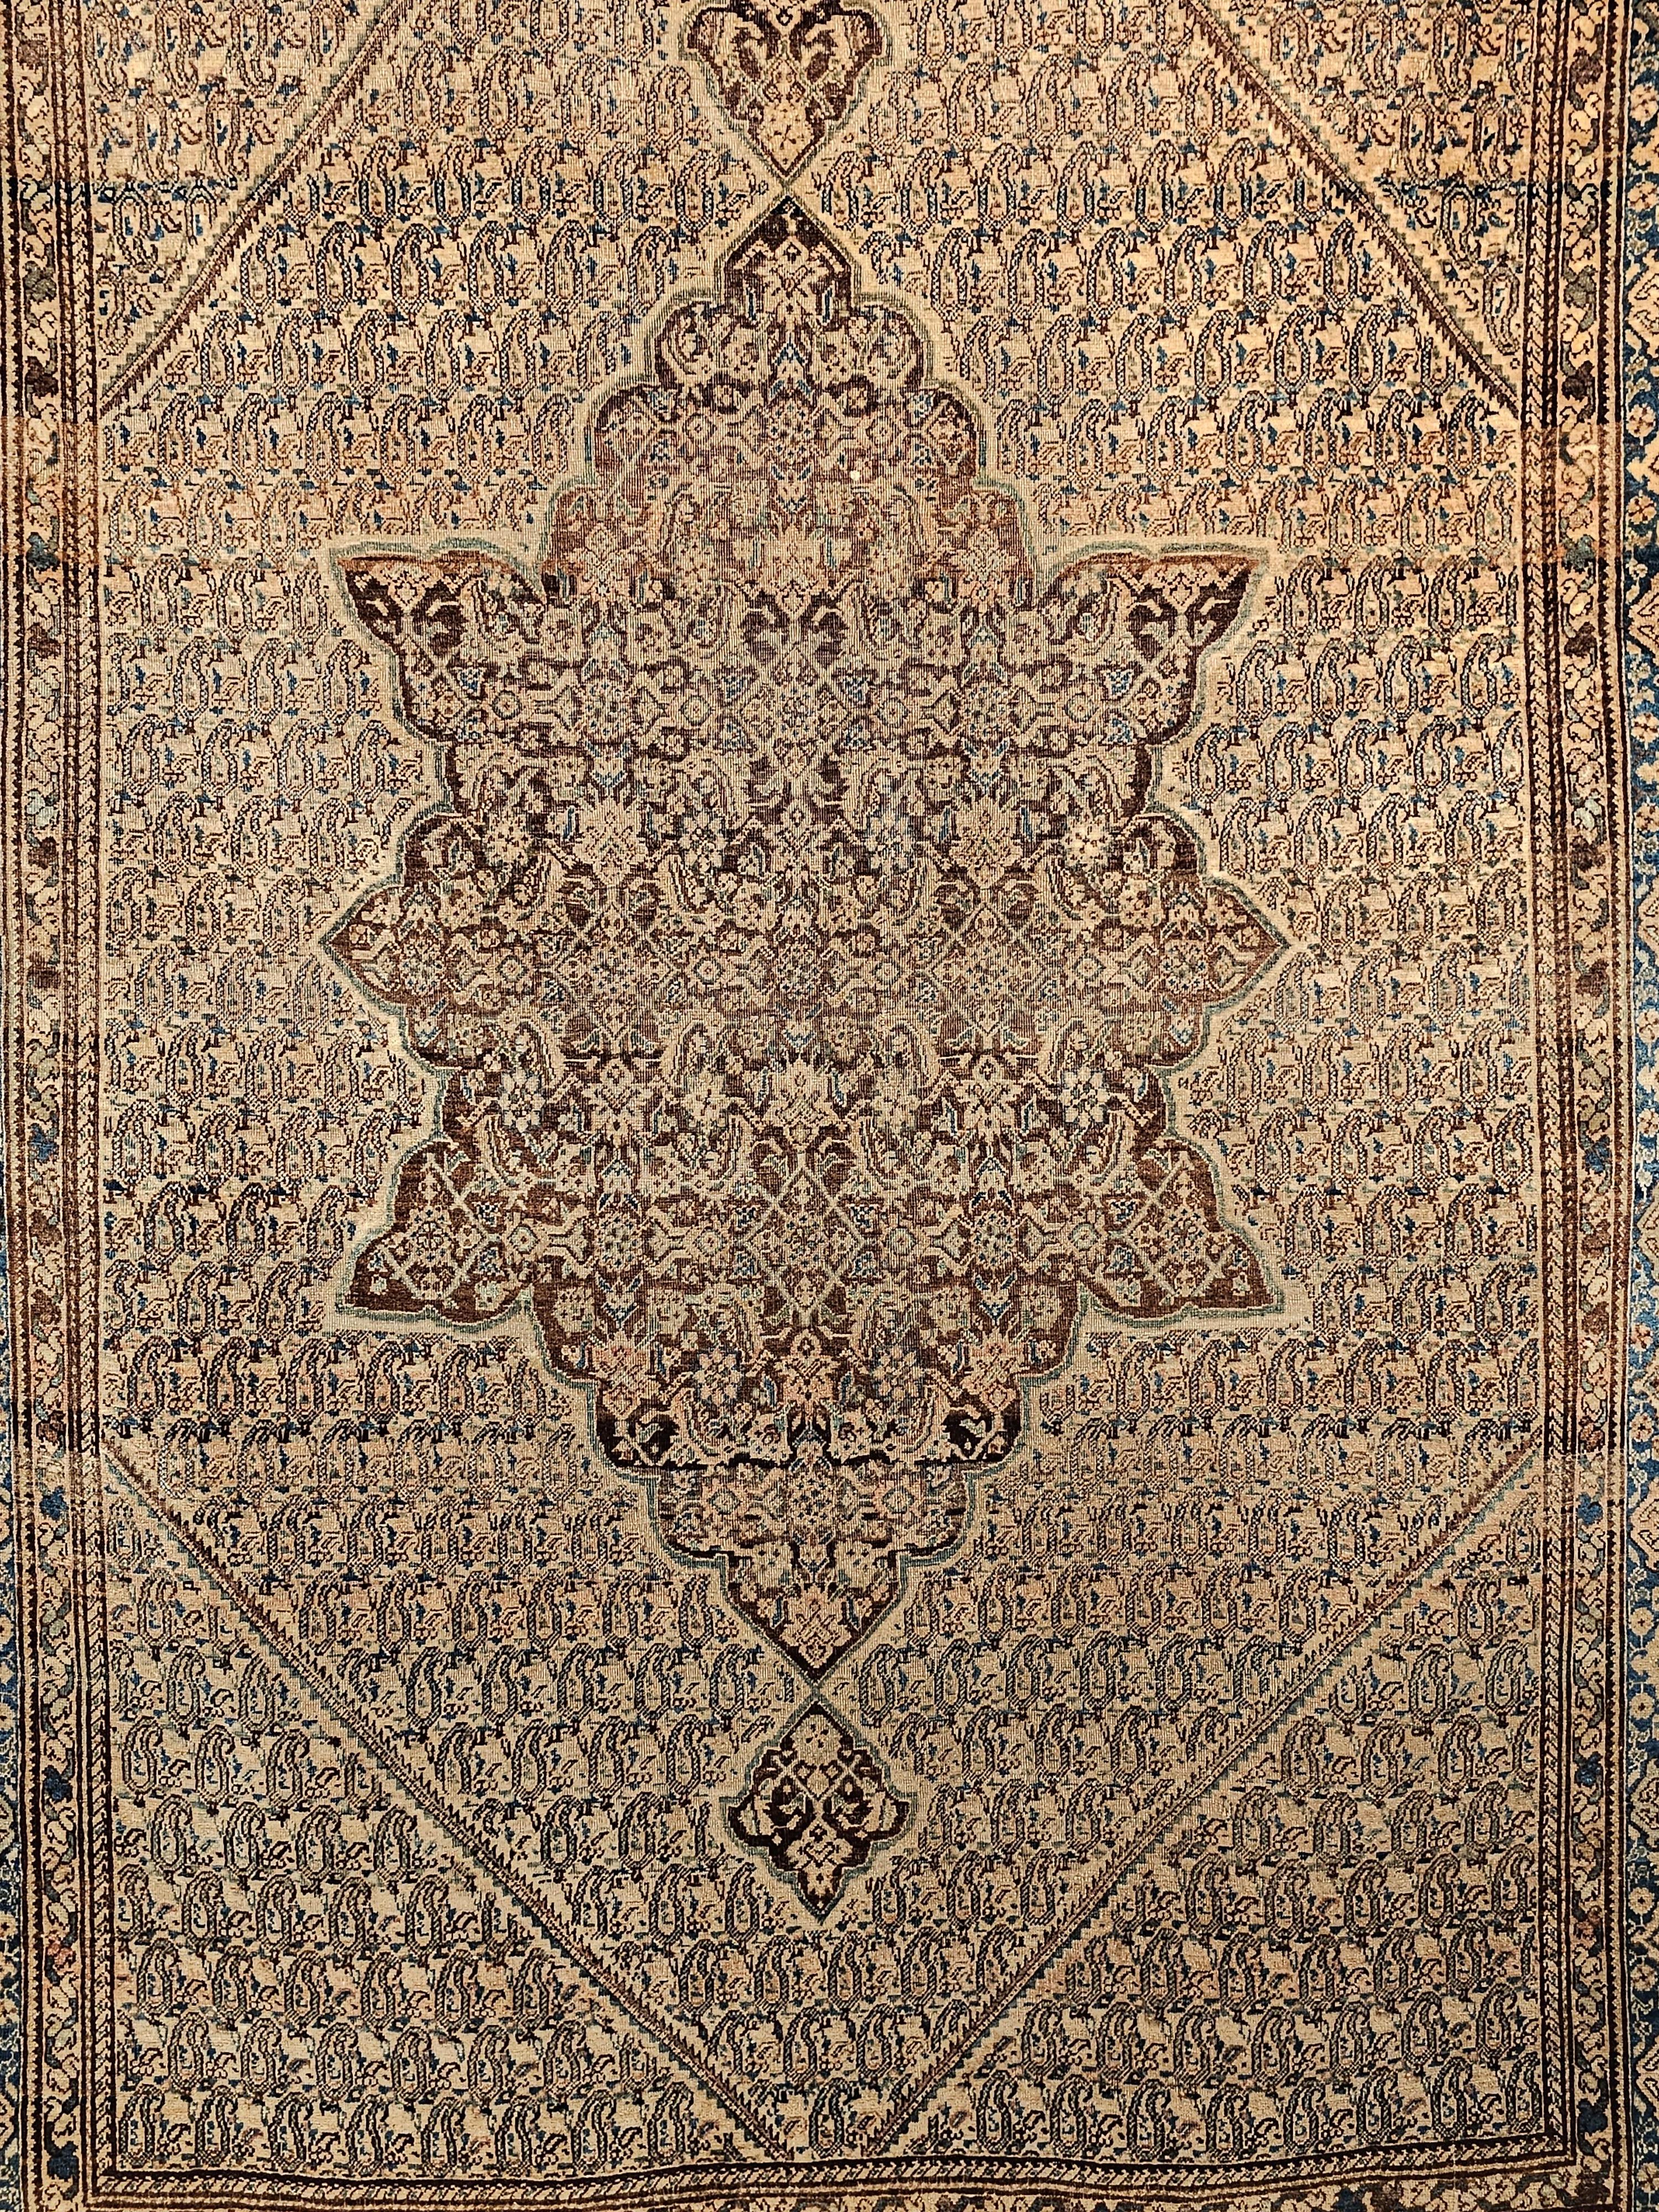 A Persian Senneh area rug in an allover paisley pattern in a pale latte, chocolate brown, and French blue colors was very finely woven in a Kurdish village in the Western Persia around the 3rd quarter of the 1800s. The beautiful Senneh has a